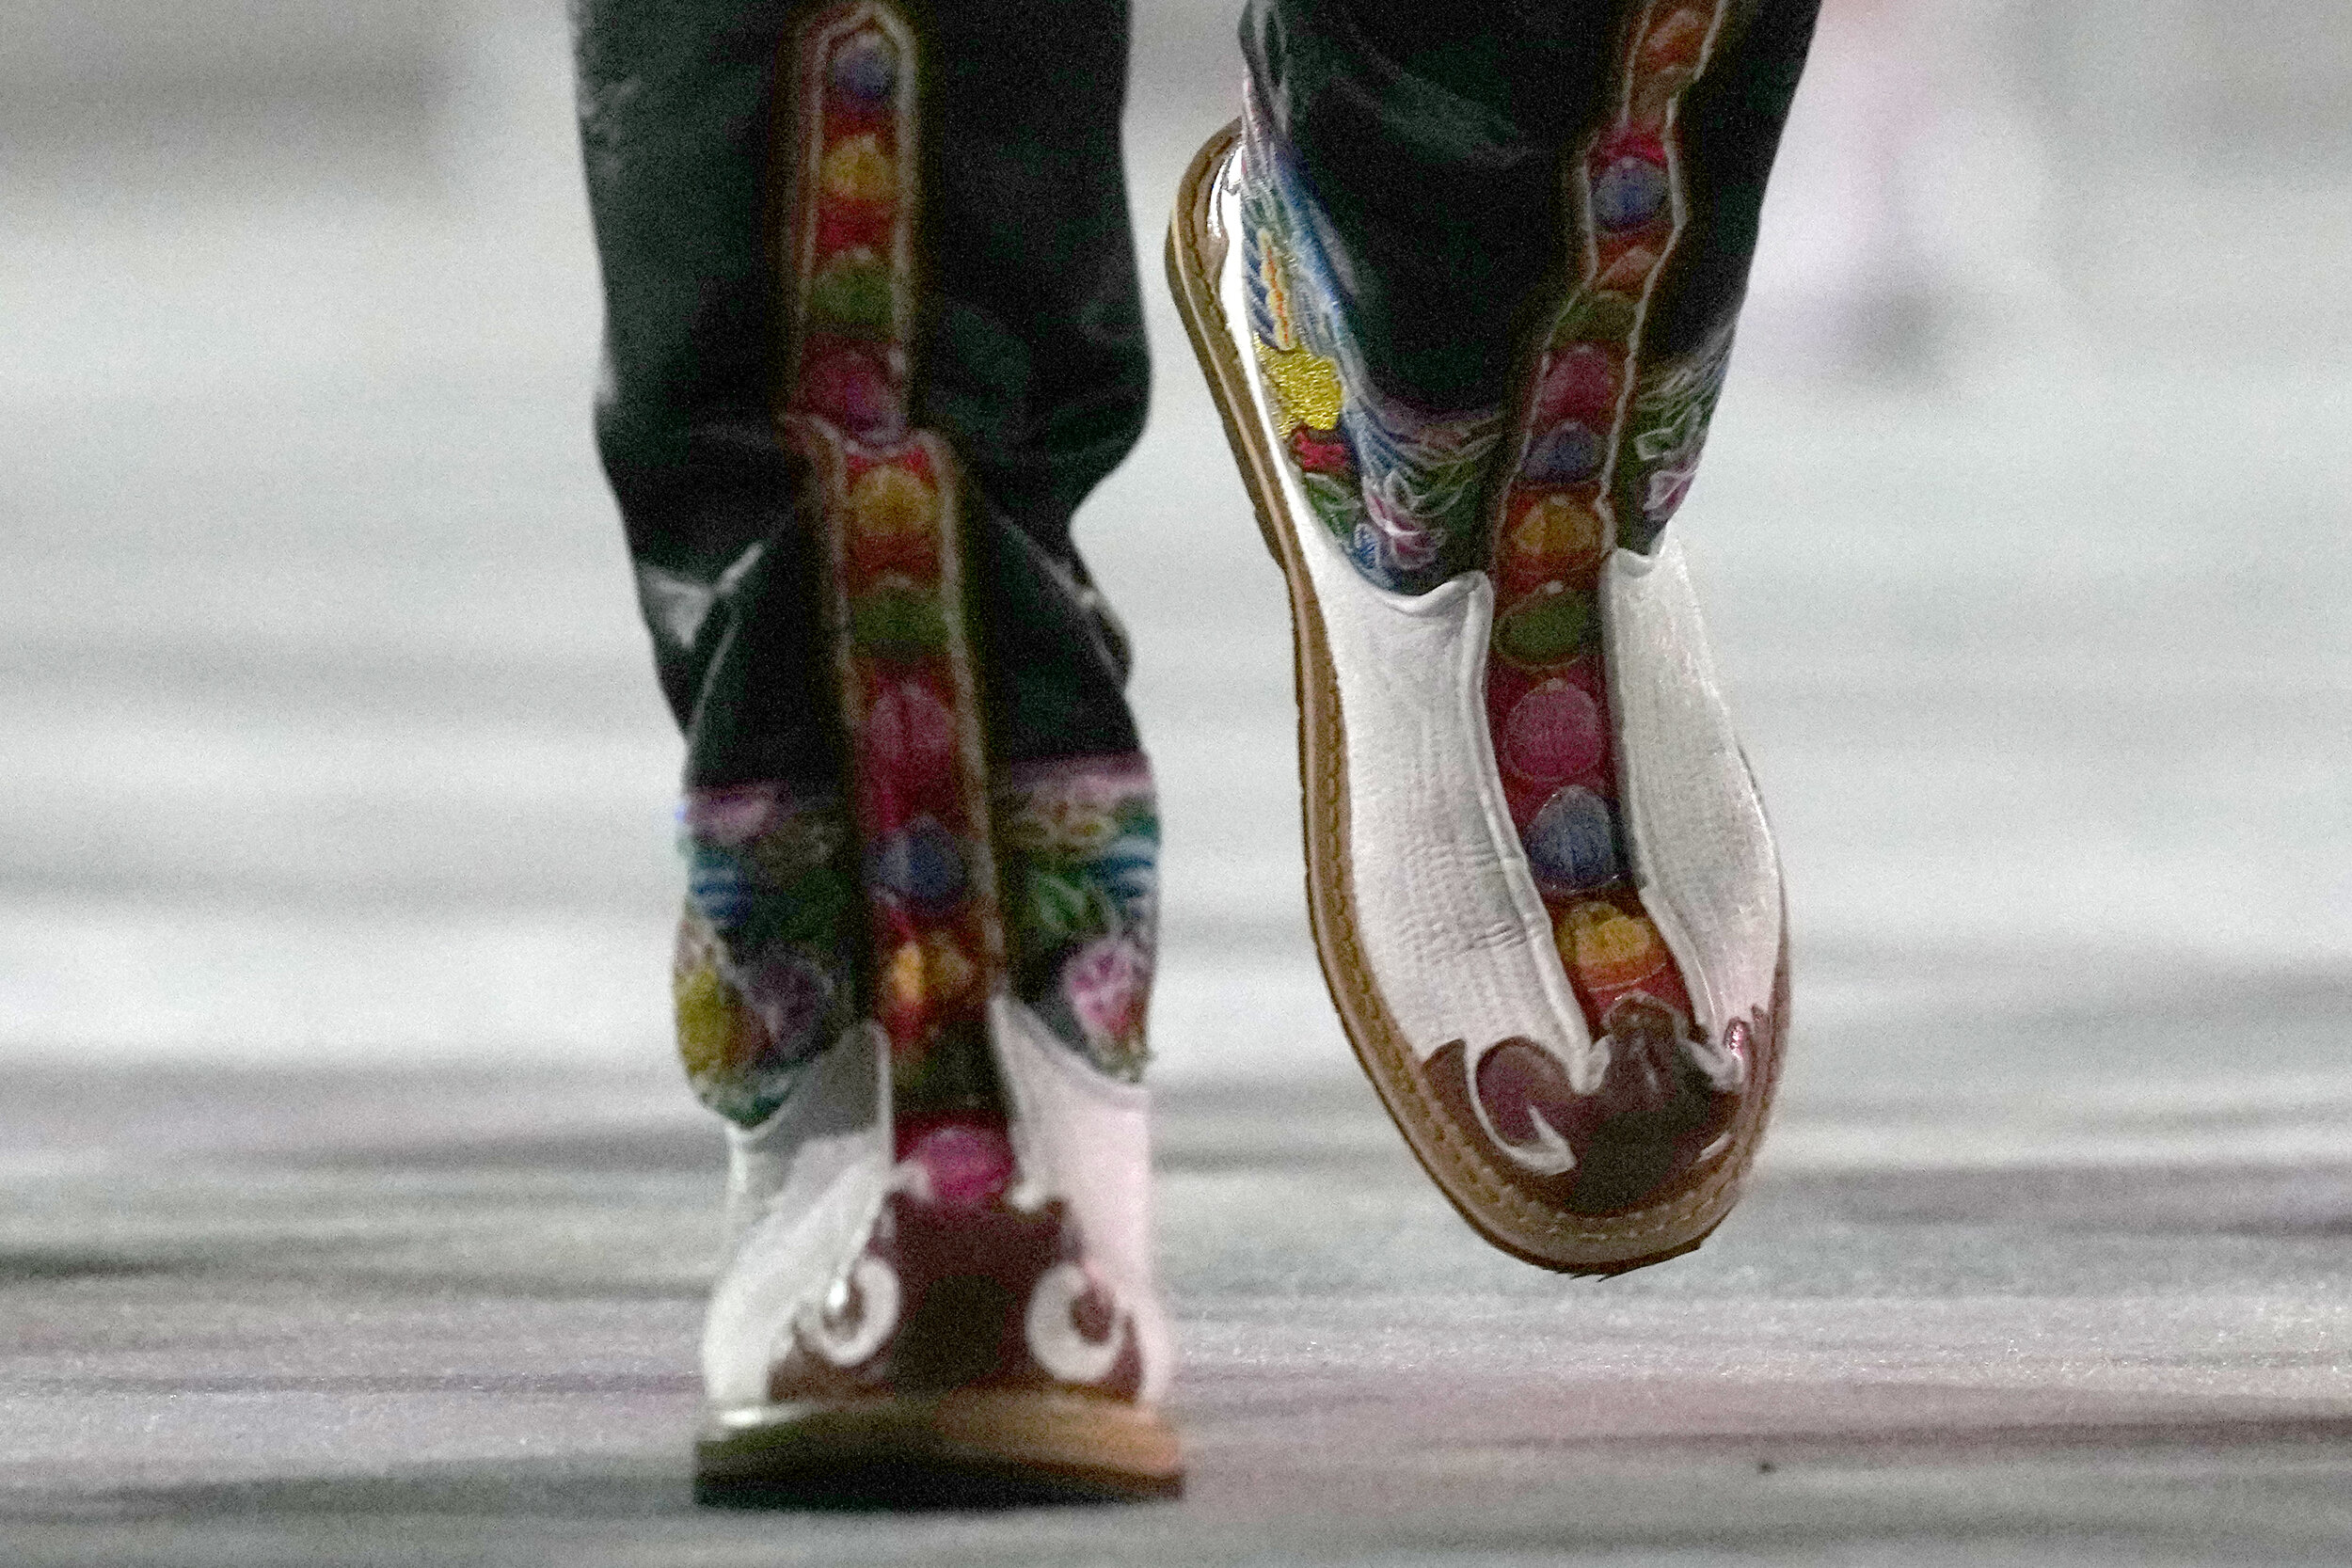  Team member of Bhutan walks during the opening ceremony in the Olympic Stadium at the 2020 Summer Olympics, Friday, July 23, 2021, in Tokyo, Japan. (AP Photo/Petr David Josek) 